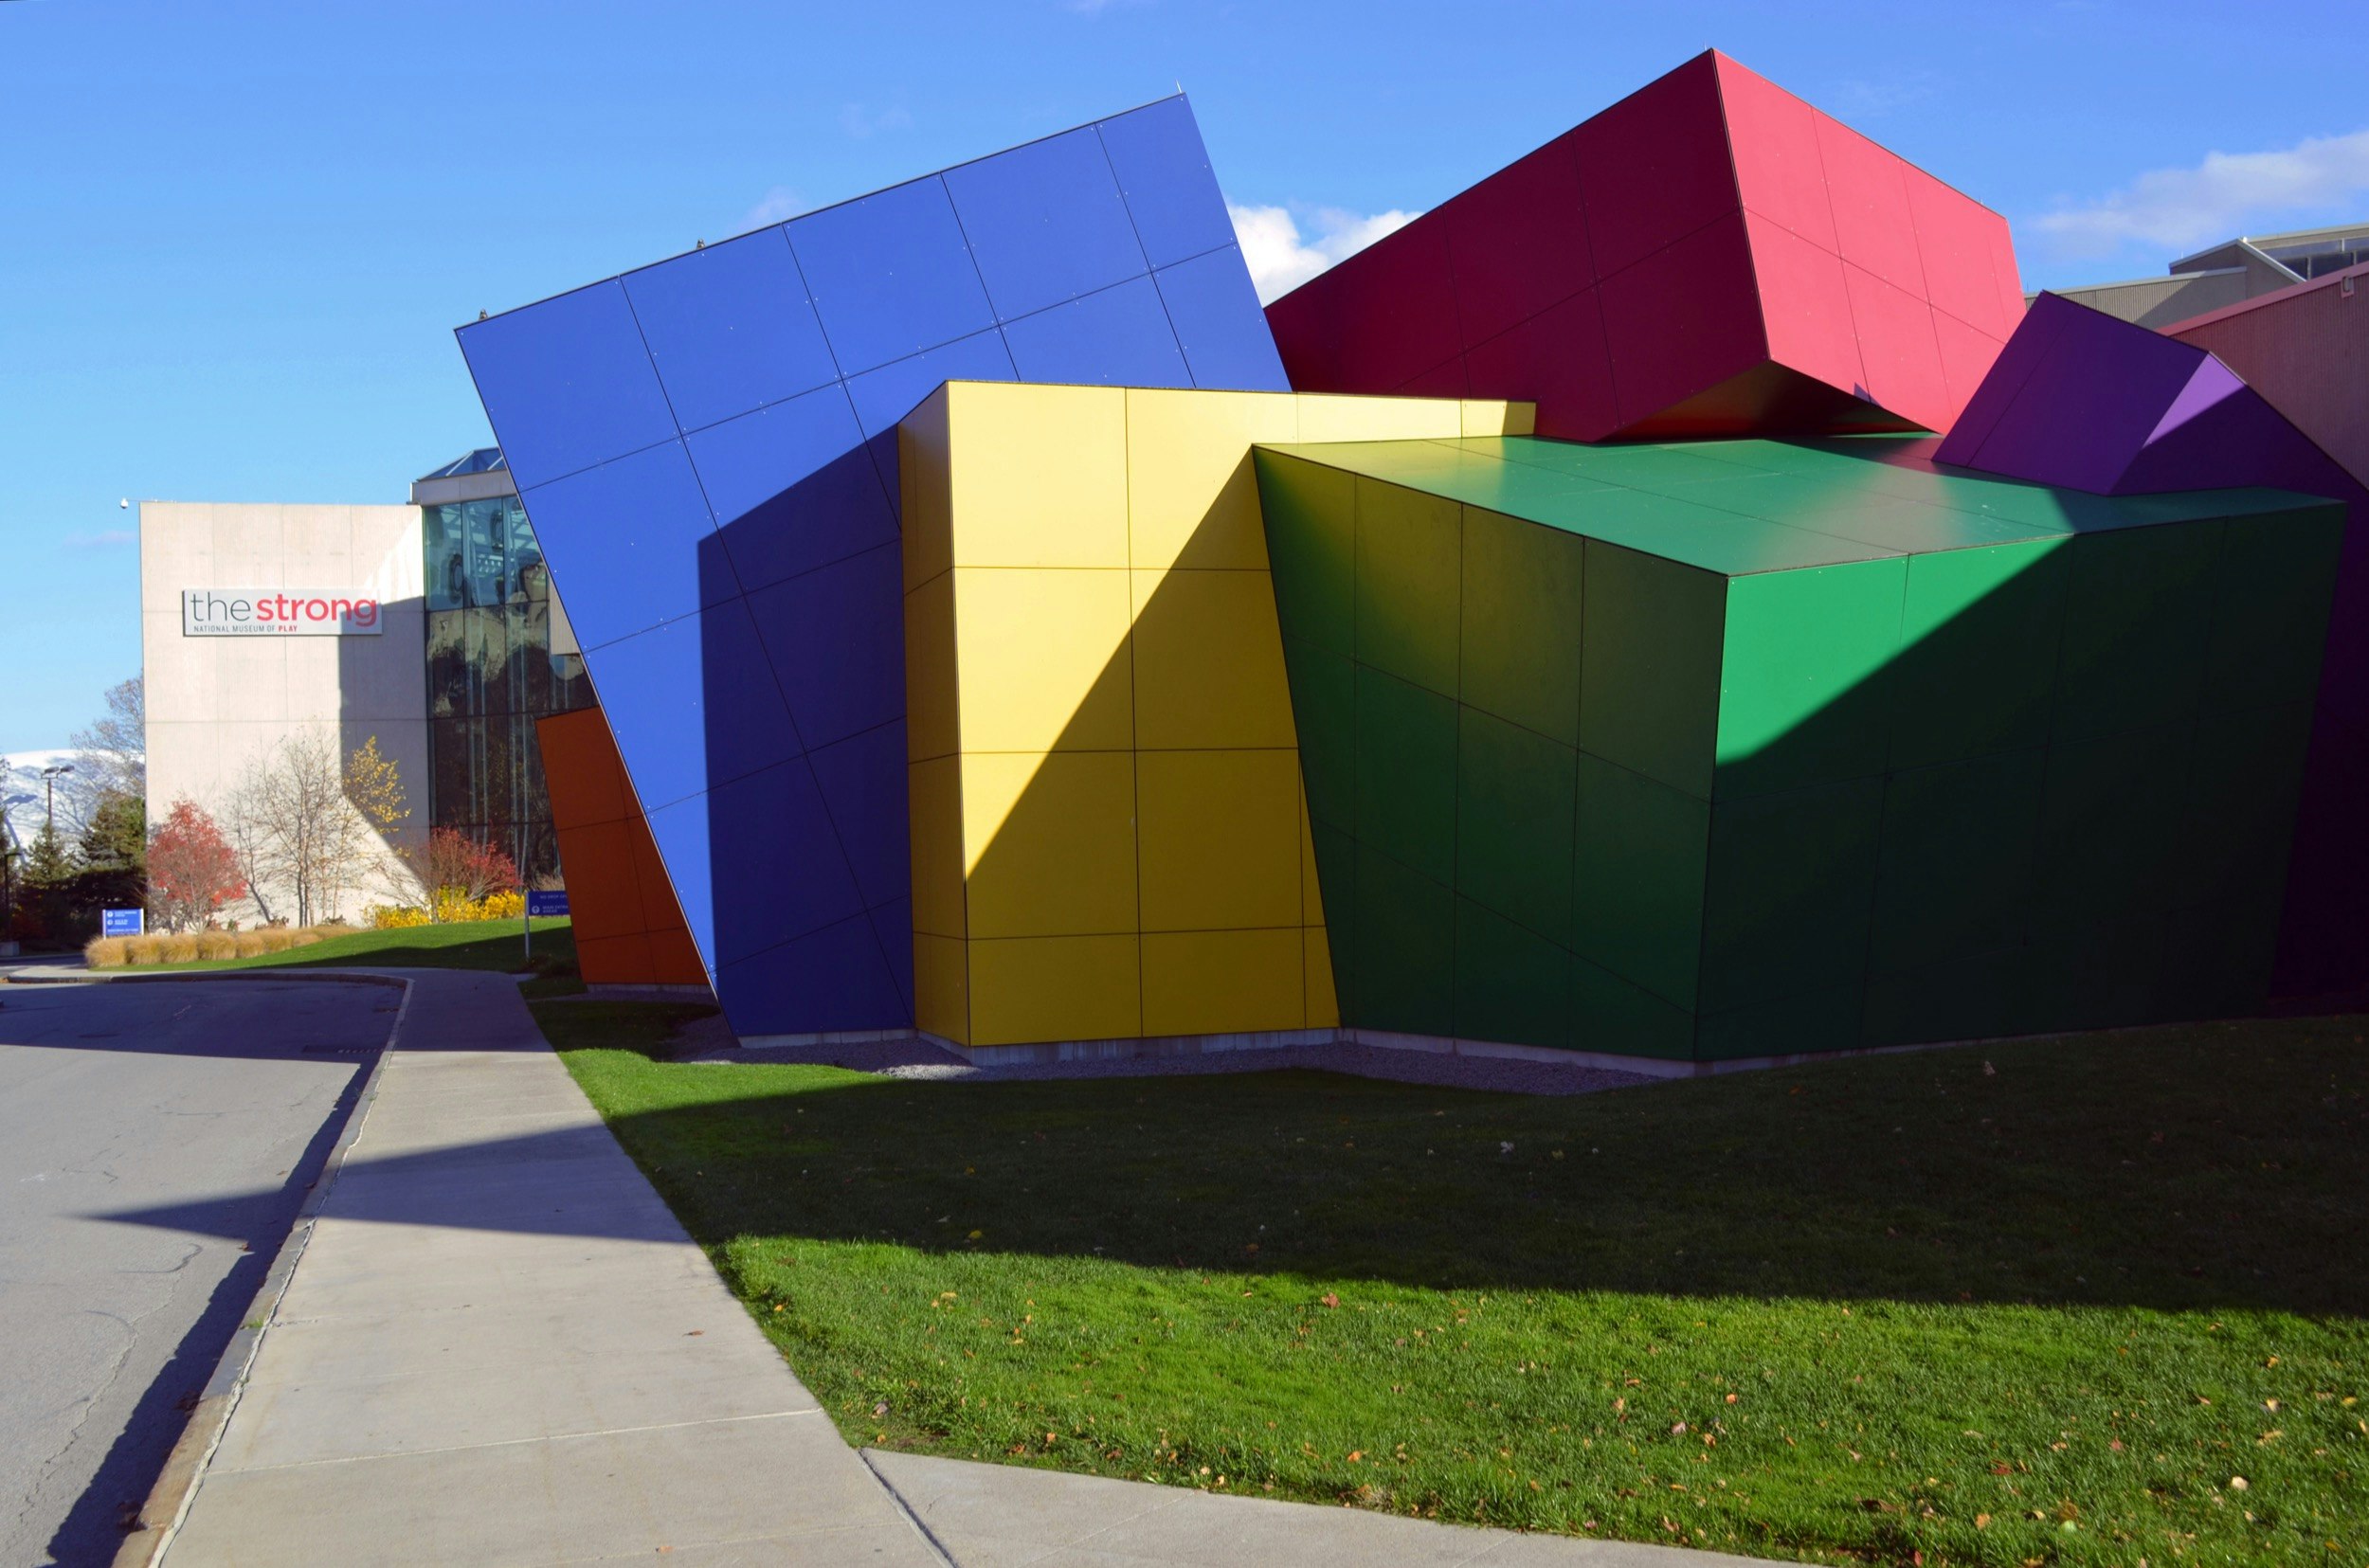 A museum dedicated to play has architecture modeled to look like huge, colorful blocks in Rochester, New York